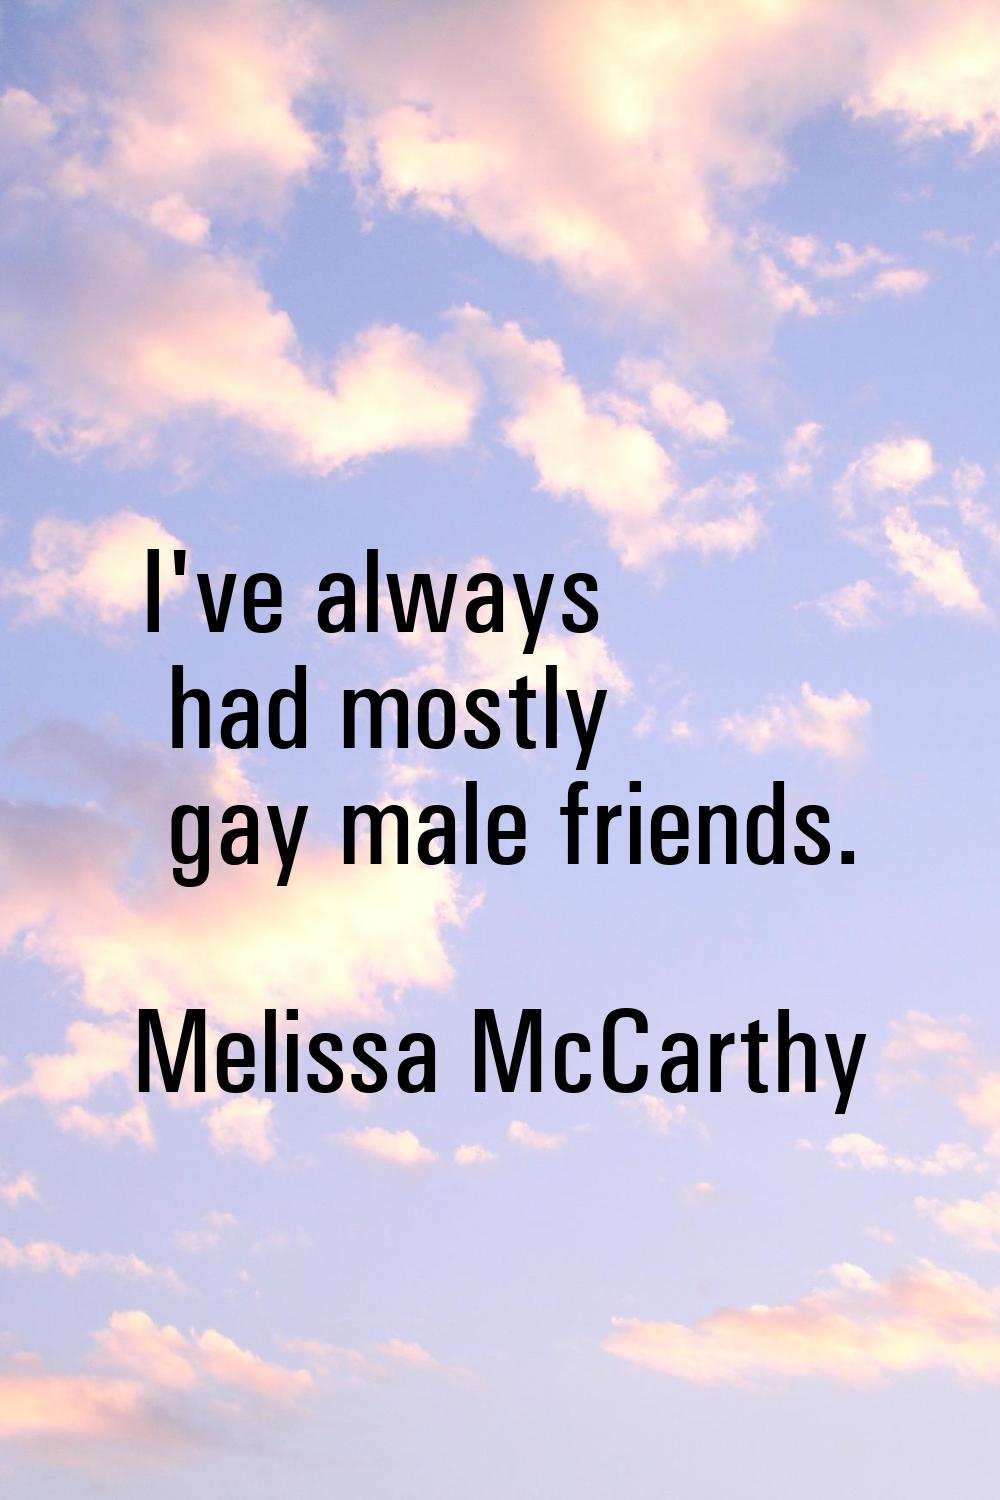 I've always had mostly gay male friends.